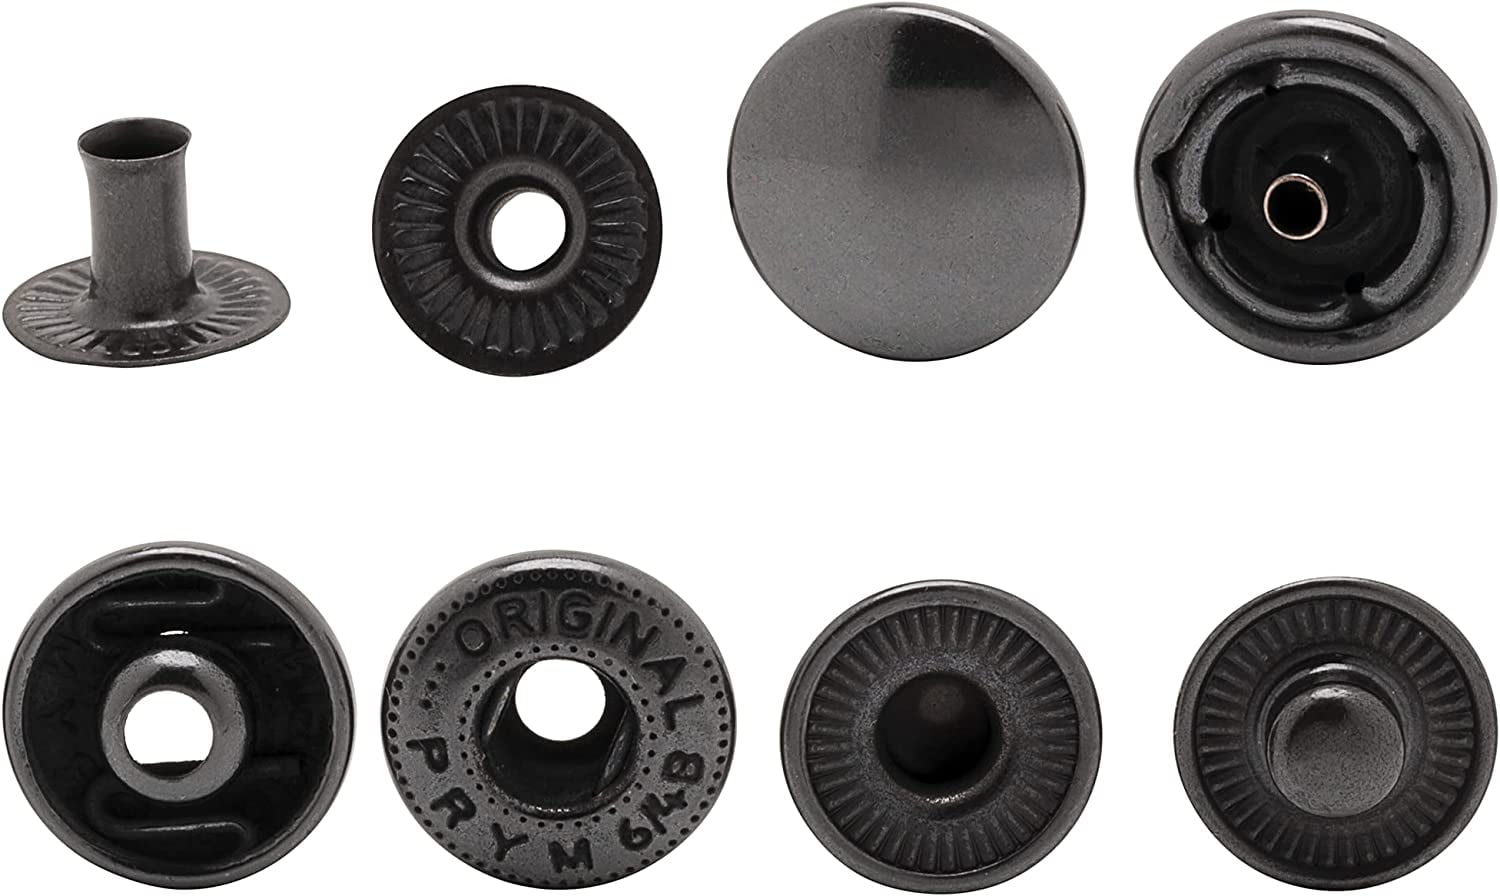 Wholesale 100sets/lot 15mm #484/831 Four Part Brass Metal Button Spring Snap  Button Snap Fasteners Silver, Bronze, Black Fp-003 - Buttons - AliExpress